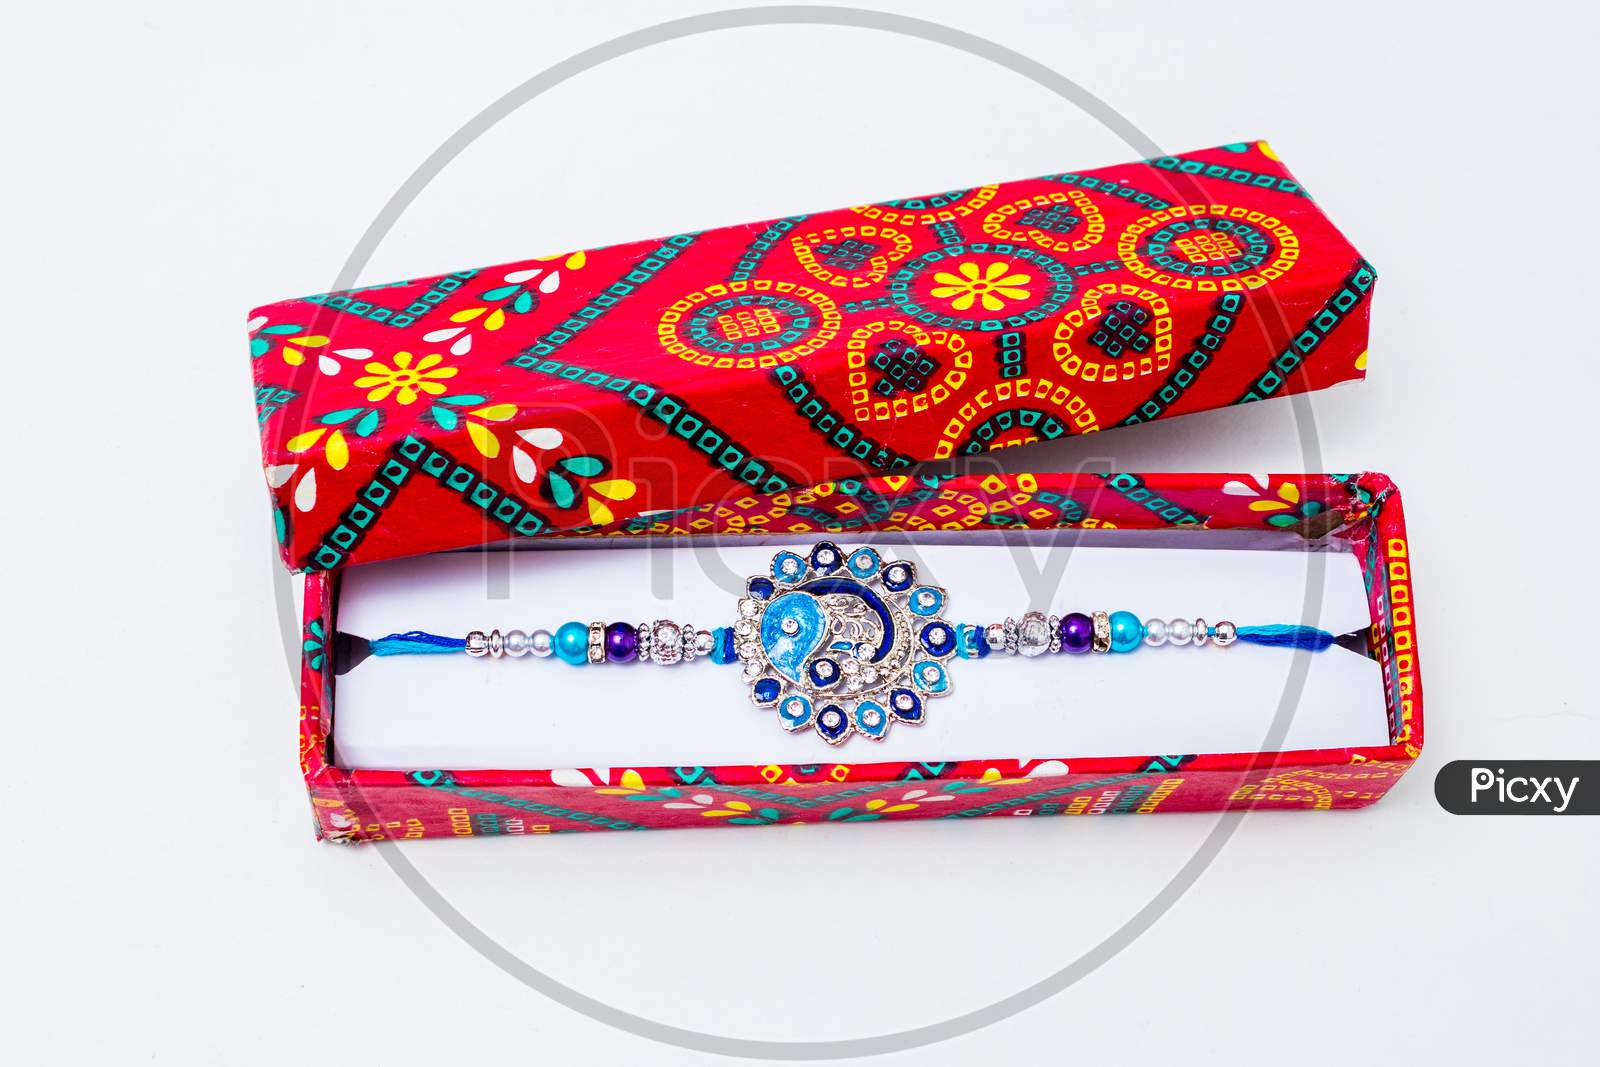 Beautiful Blue Diamond Design Rakhi And Gift Box Over White Background.Raksha Bandhan Festival Is Celebrated In India To Express Love And Bond Between Brother And Sister. Traditional Indian Wrist Band